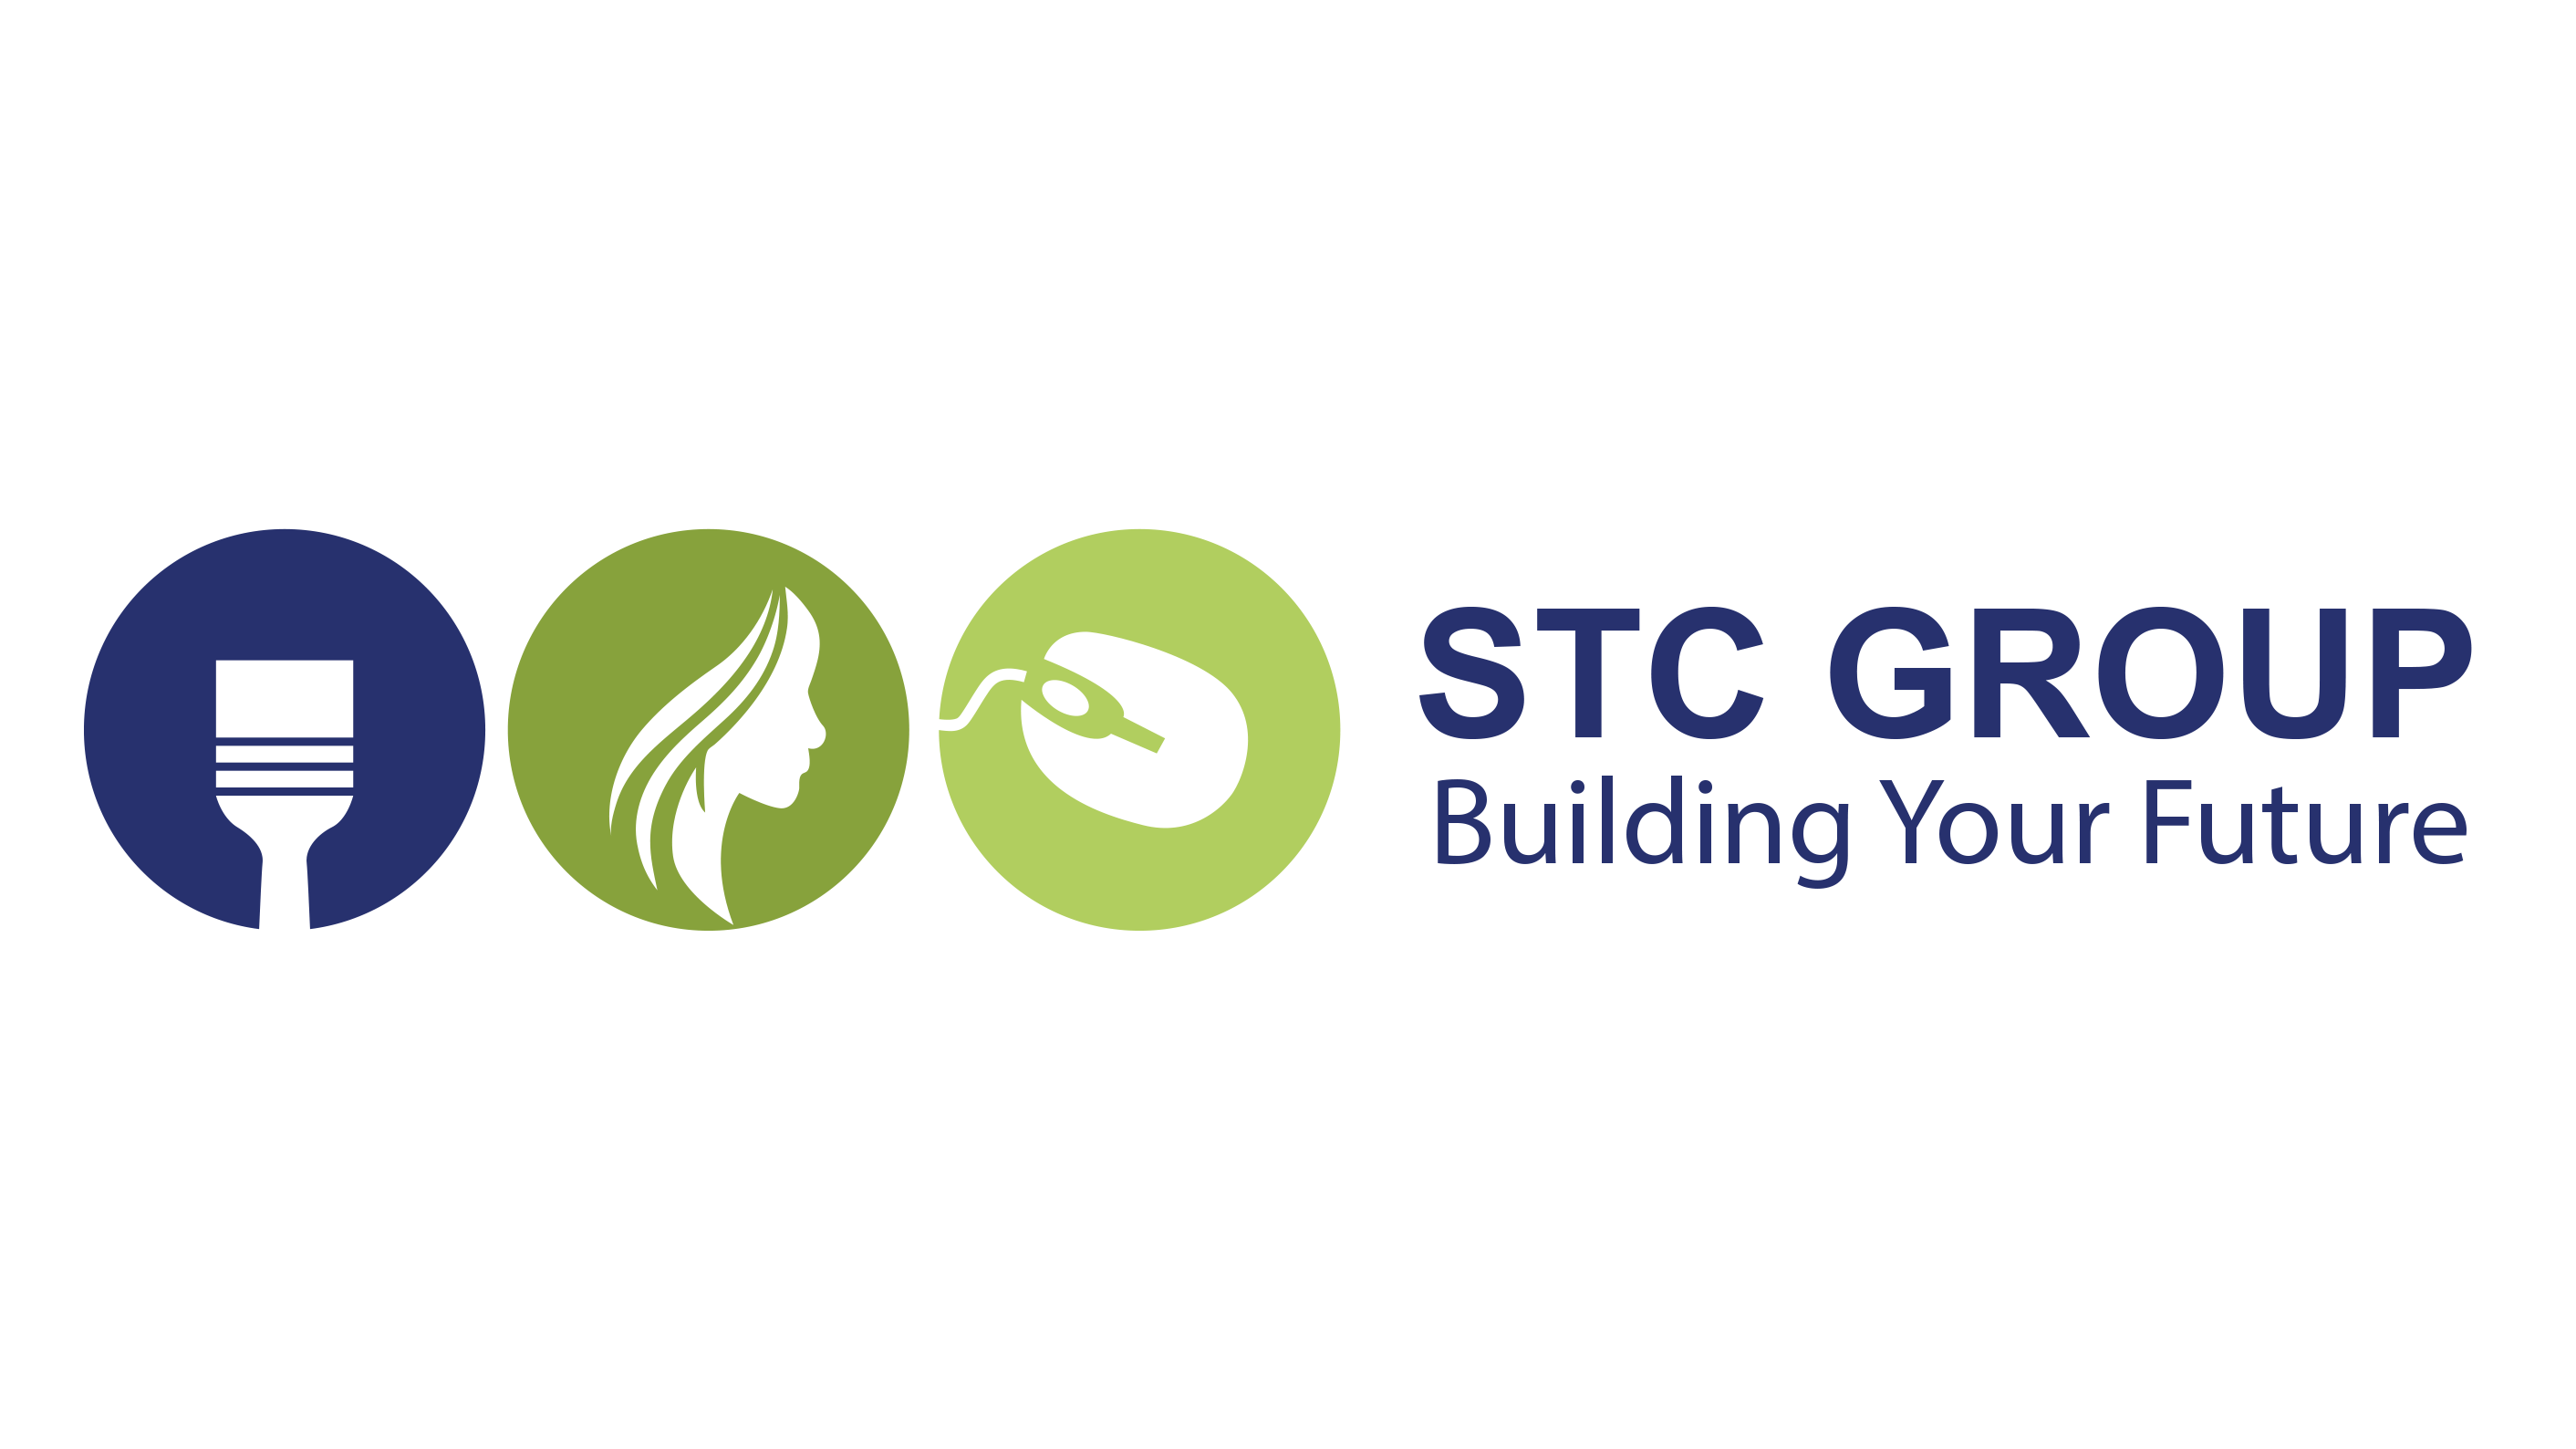 The STC Group